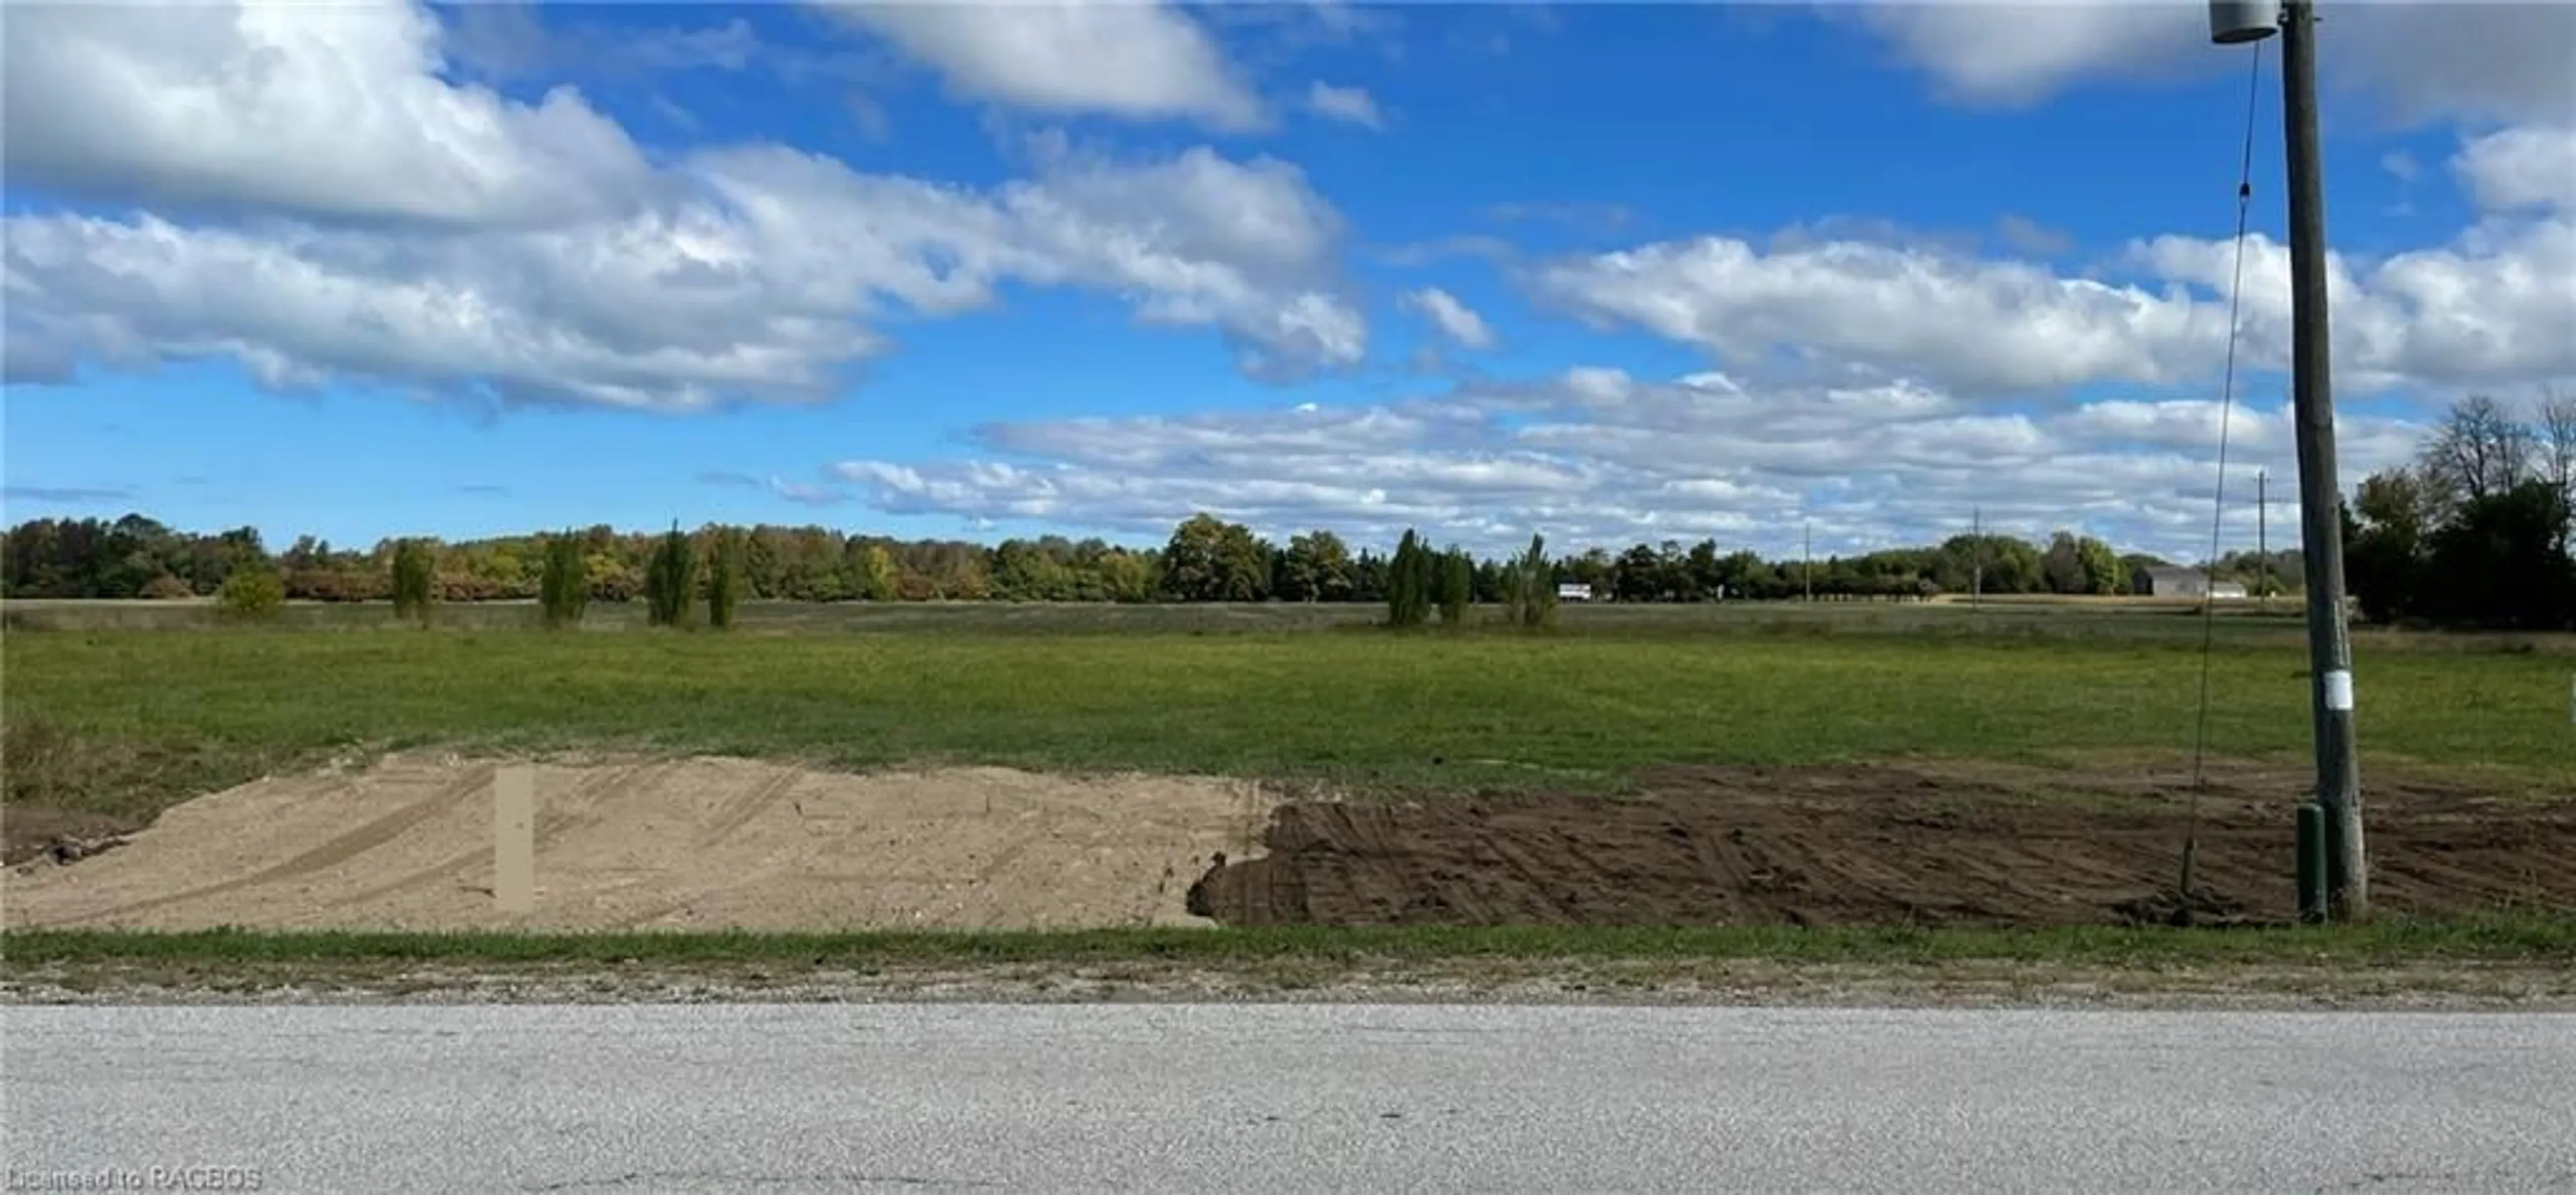 Street view for PT LT 36 8 Conc, Huron-Kinloss Ontario N0G 2R0